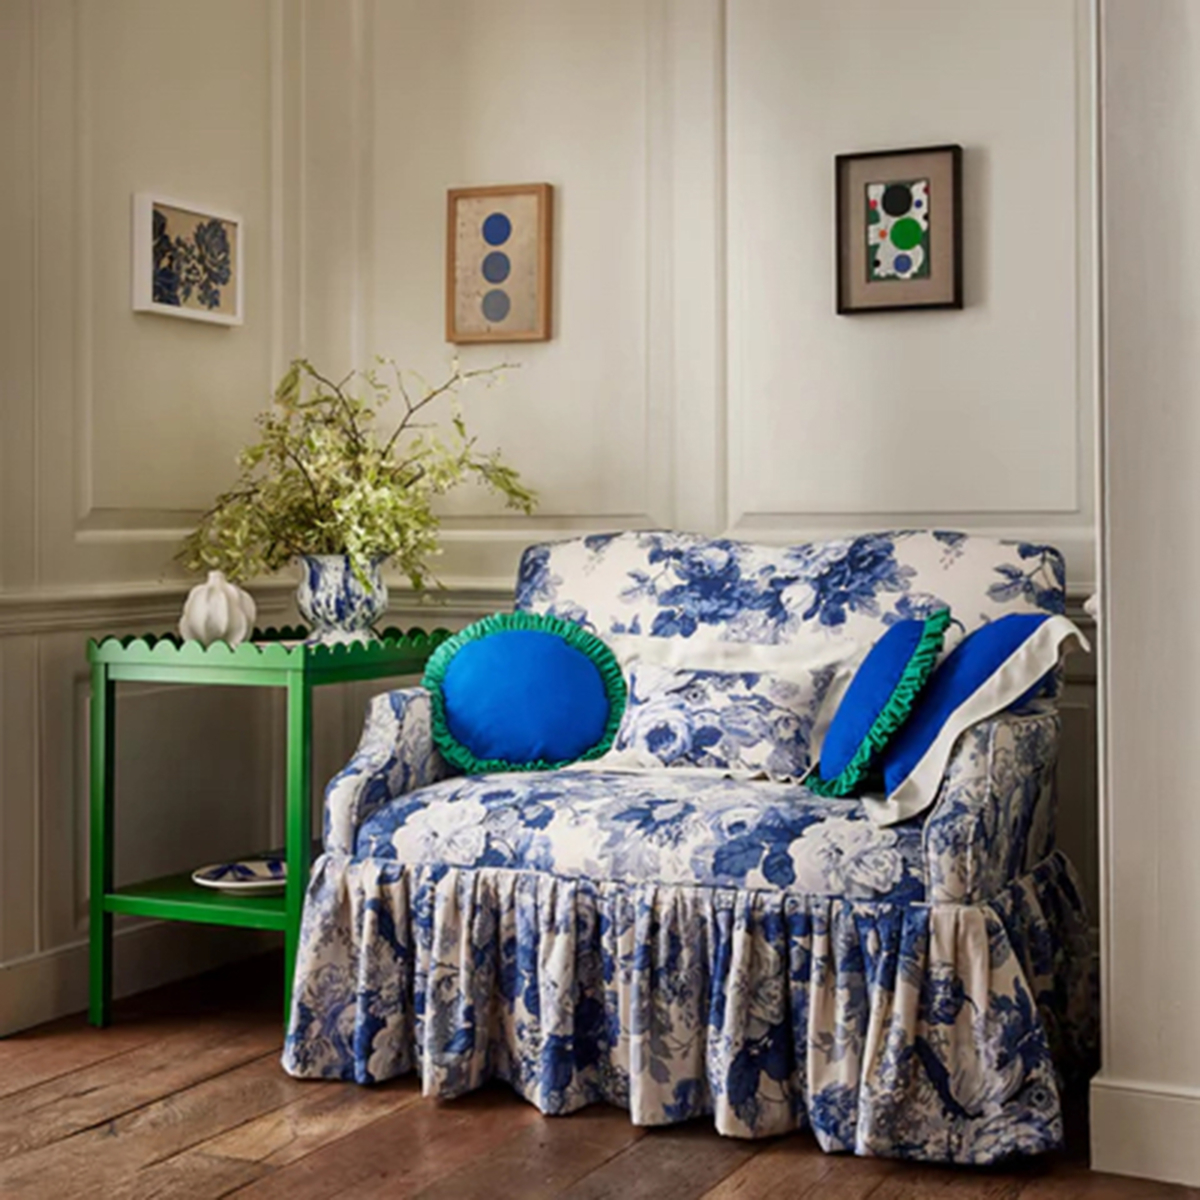 Stone coloured panelled wall, blue and white floral statement loveseat with large ruffle trim, green scallop top side table